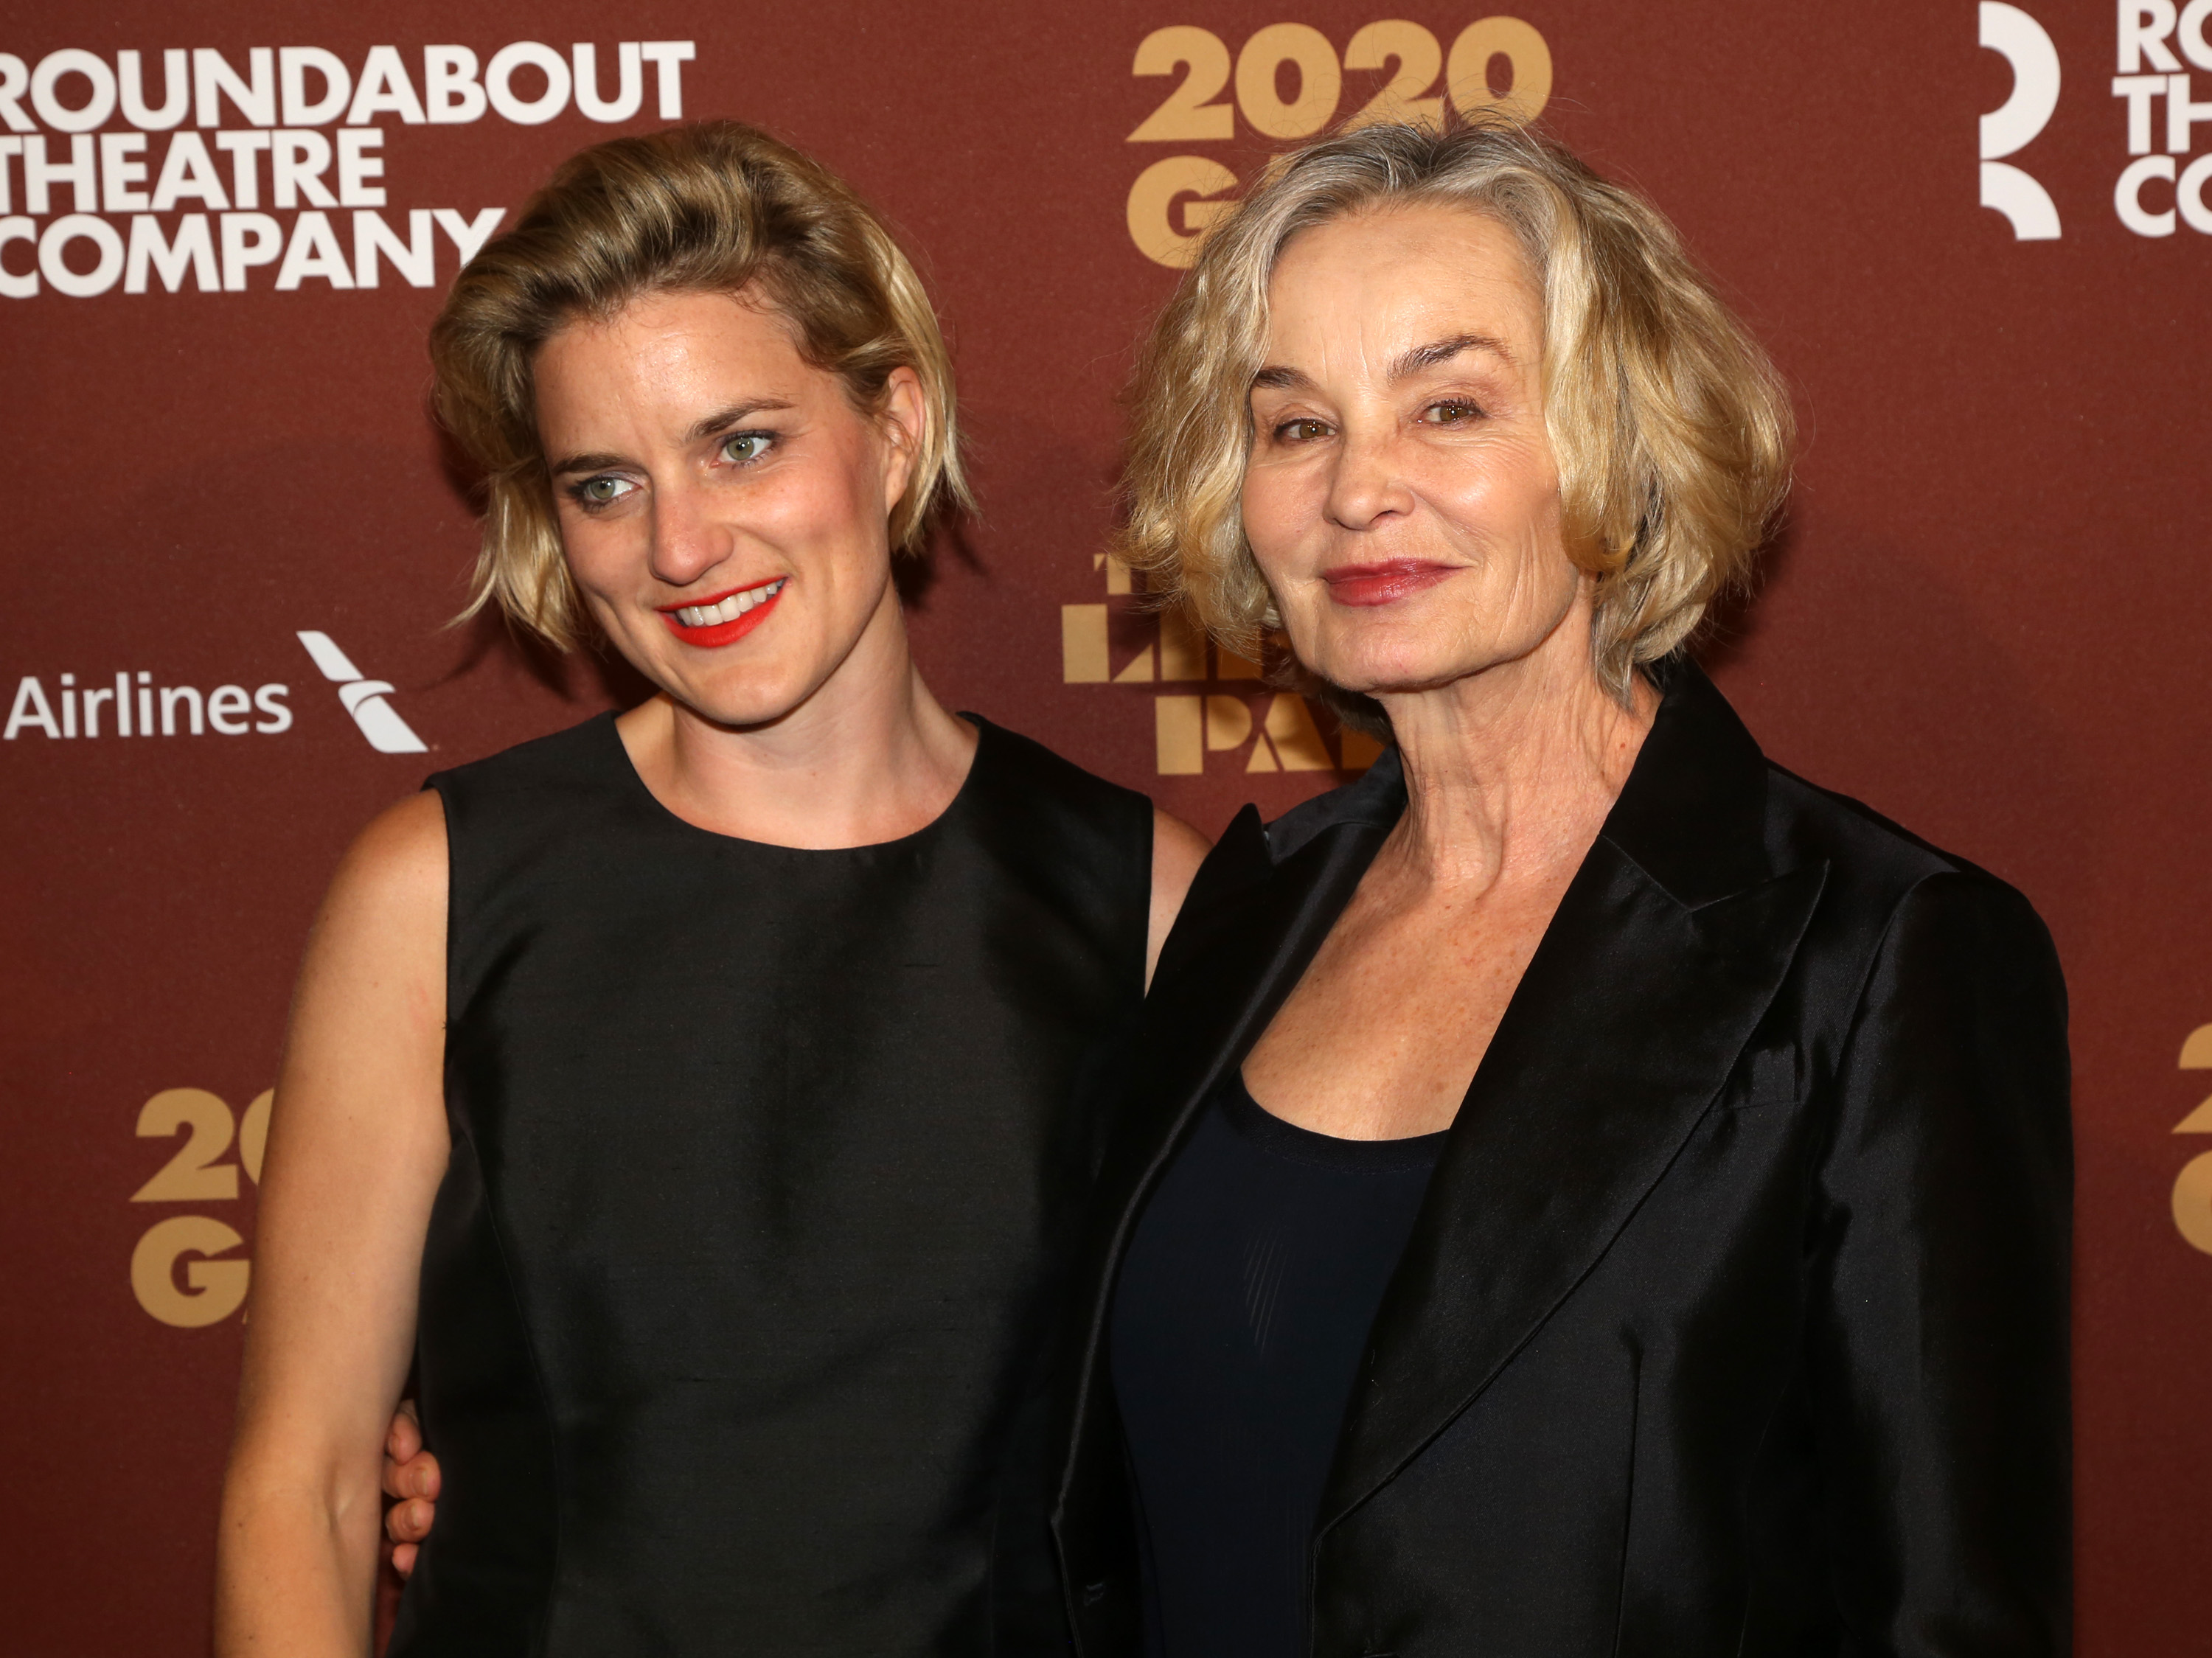 Hannah Shepard and mother Jessica Lange pose at the 2020 Roundabout Theater Gala honoring Alan Cumming, Michael Kors & Lance LePere at The Ziegfeld Ballroom on March 2, 2020 in New York City. | Source: Getty Images